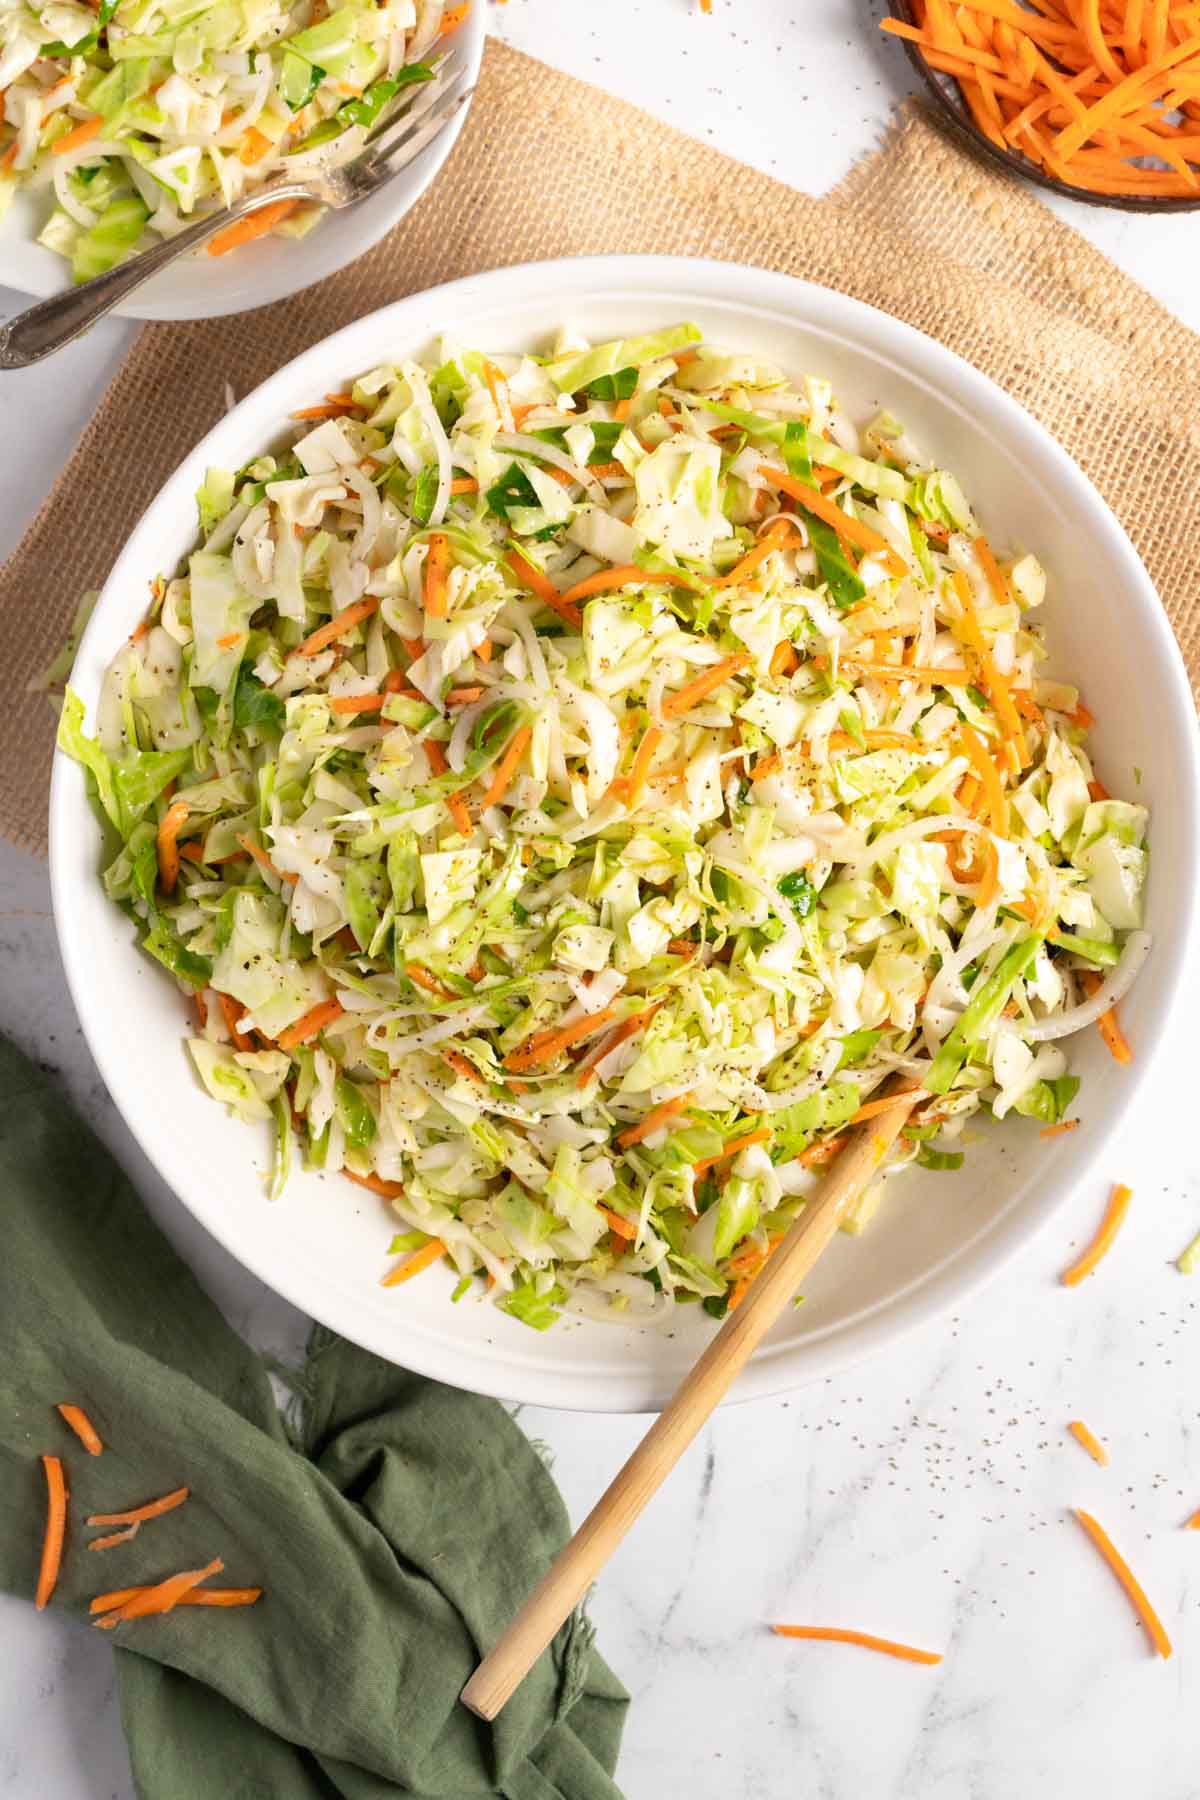 Coleslaw in a serving bowl with a wooden spoon.